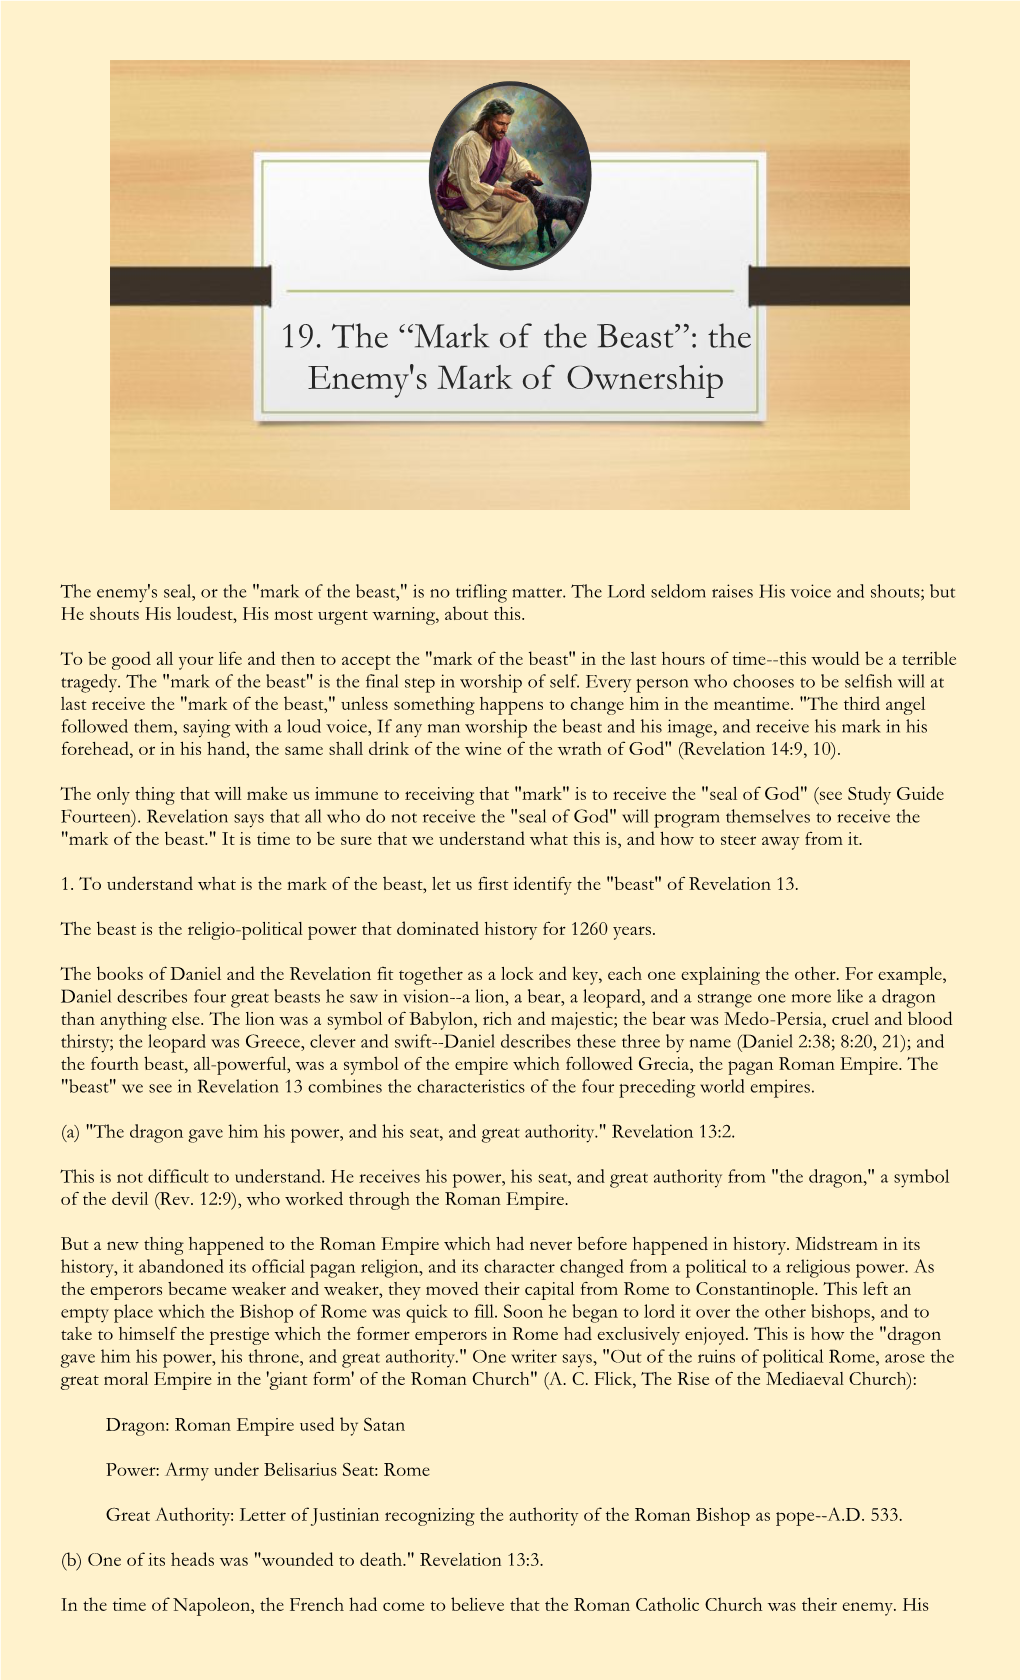 19. the “Mark of the Beast”: the Enemy's Mark of Ownership